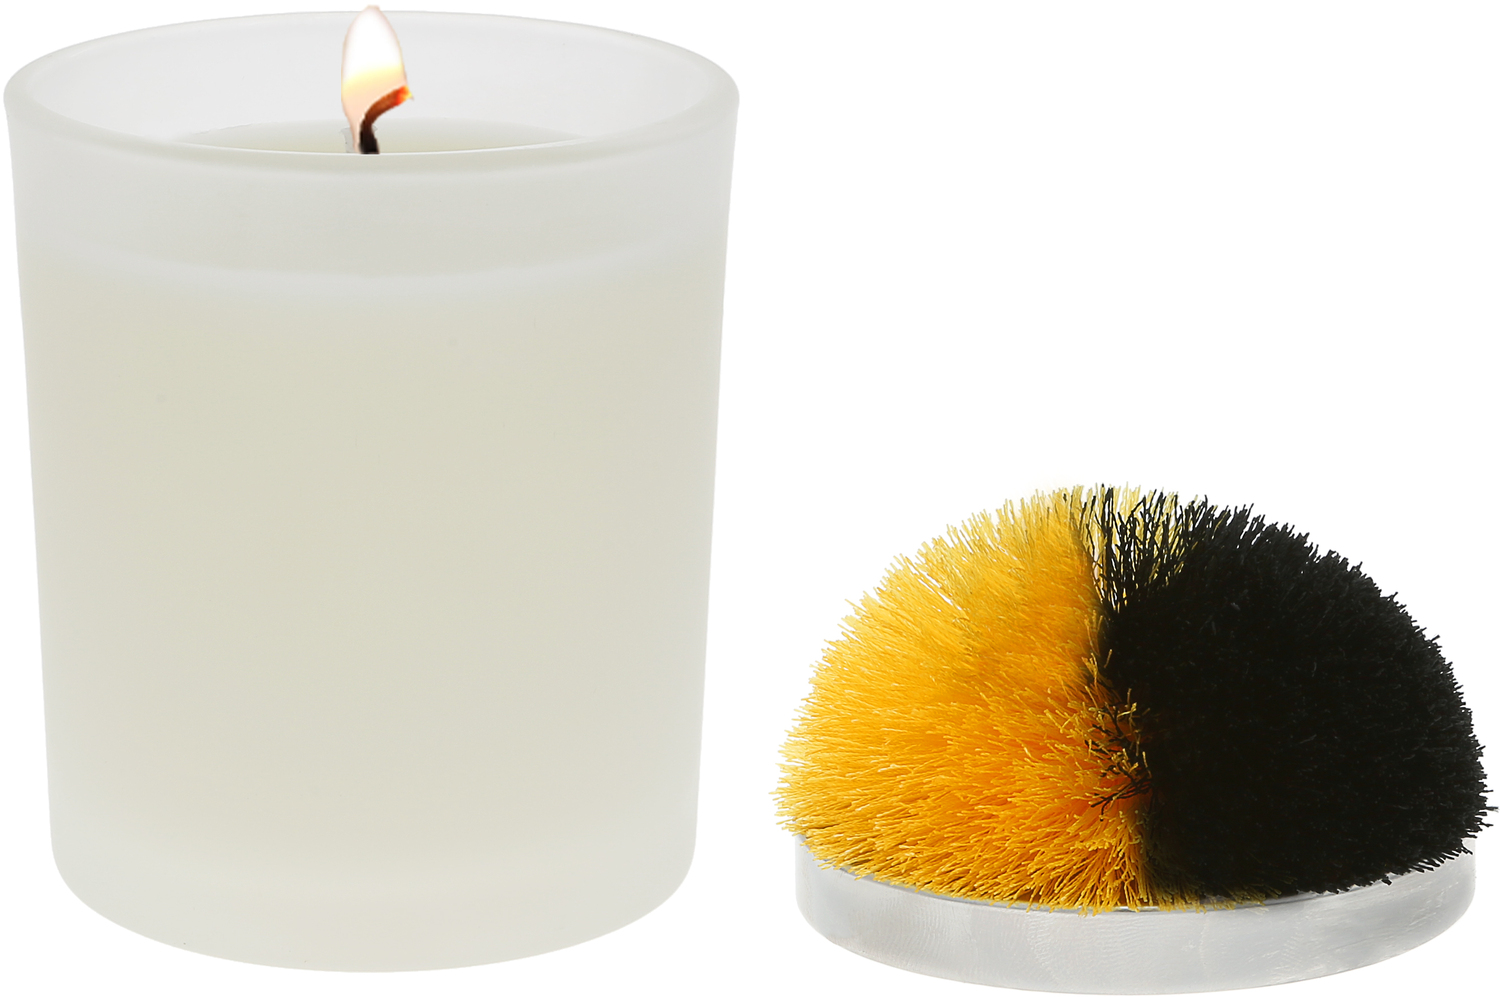 Blank - Black & Yellow by Repre-Scent - Blank - Black & Yellow - 5.5 oz - 100% Soy Wax Candle with Pom Pom Lid
Scent: Tranquility